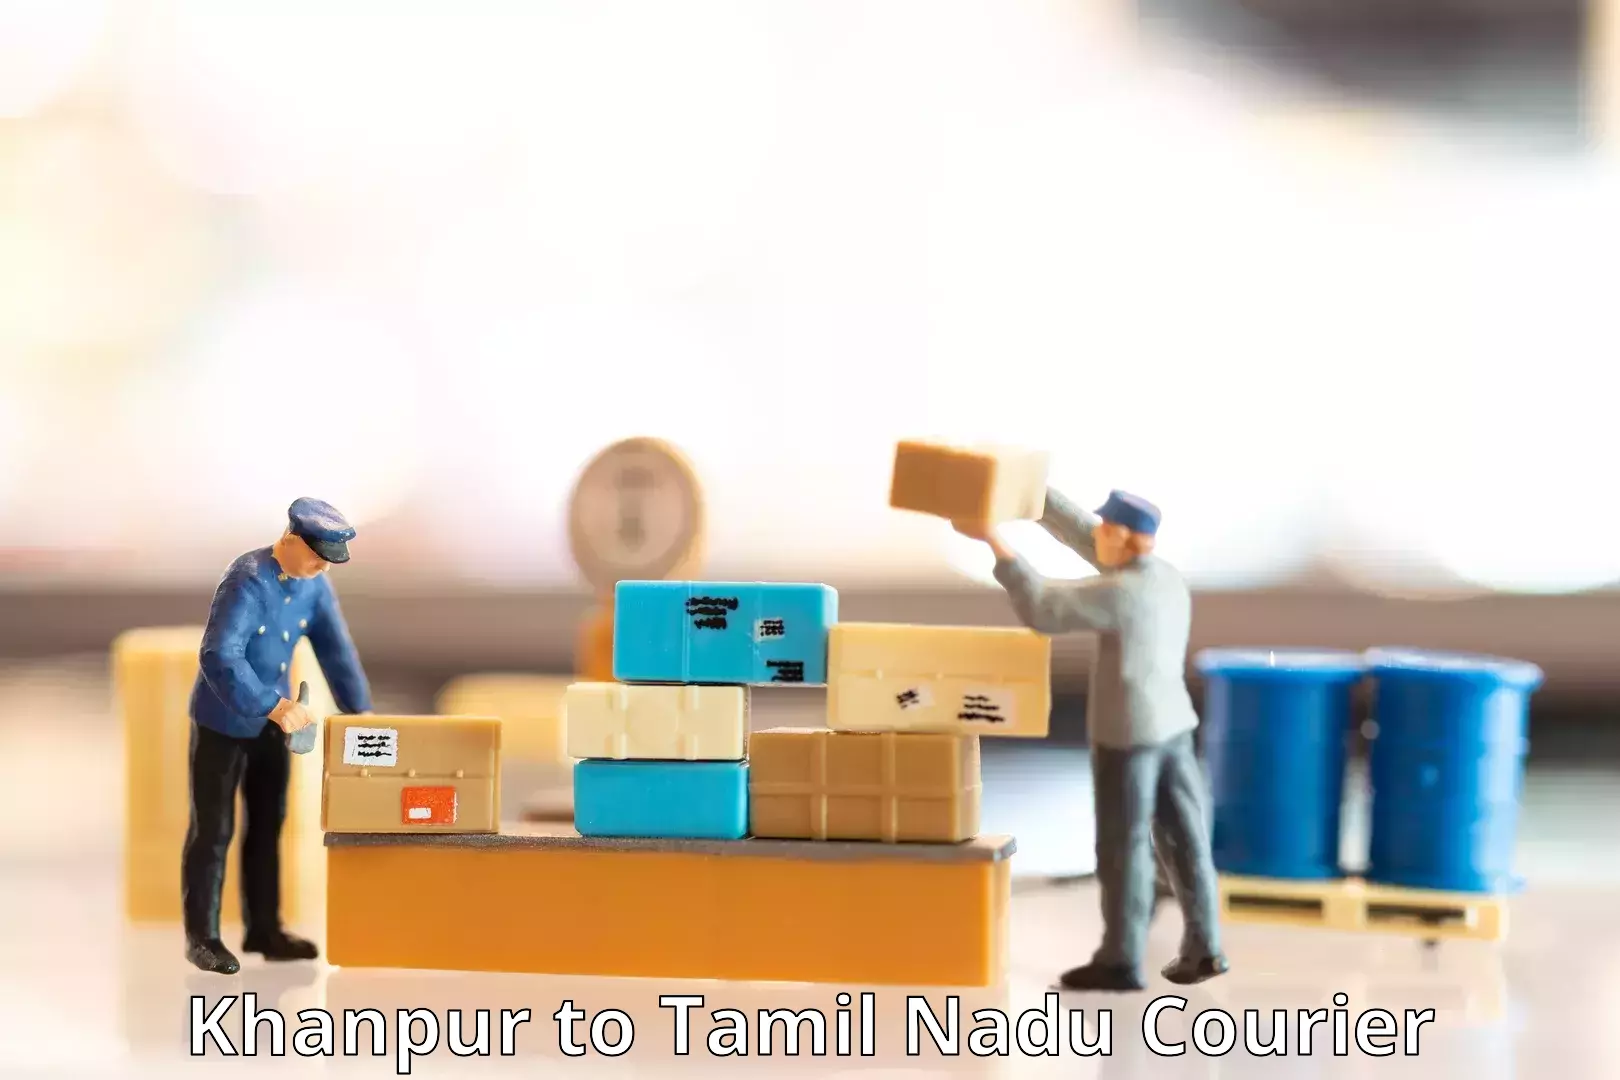 Reliable courier services Khanpur to Tiruchi